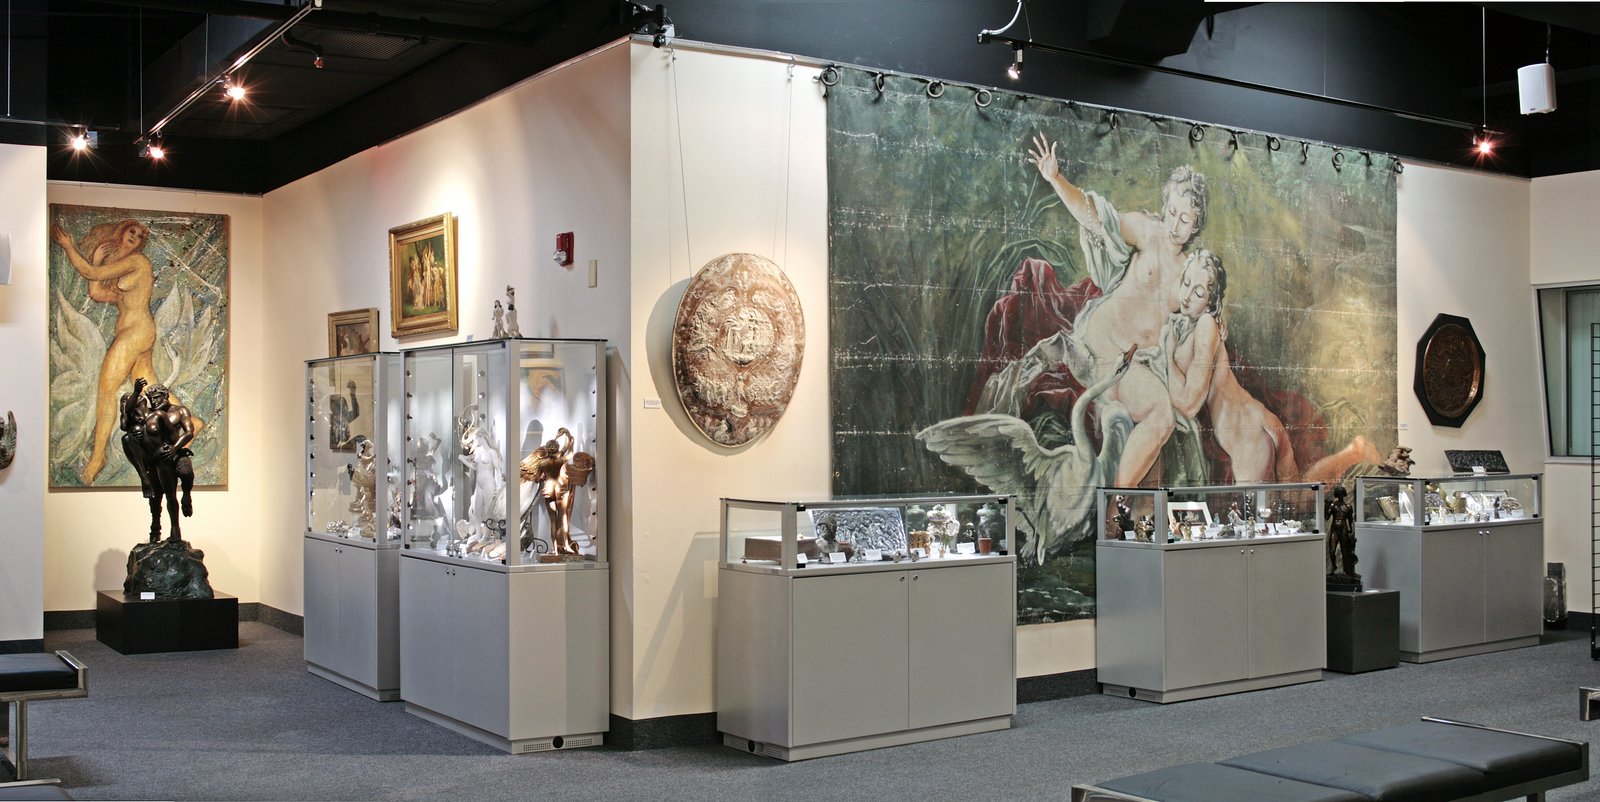 A variety of objects including tapestries, glass display cases, and paintings fill a gallery space.